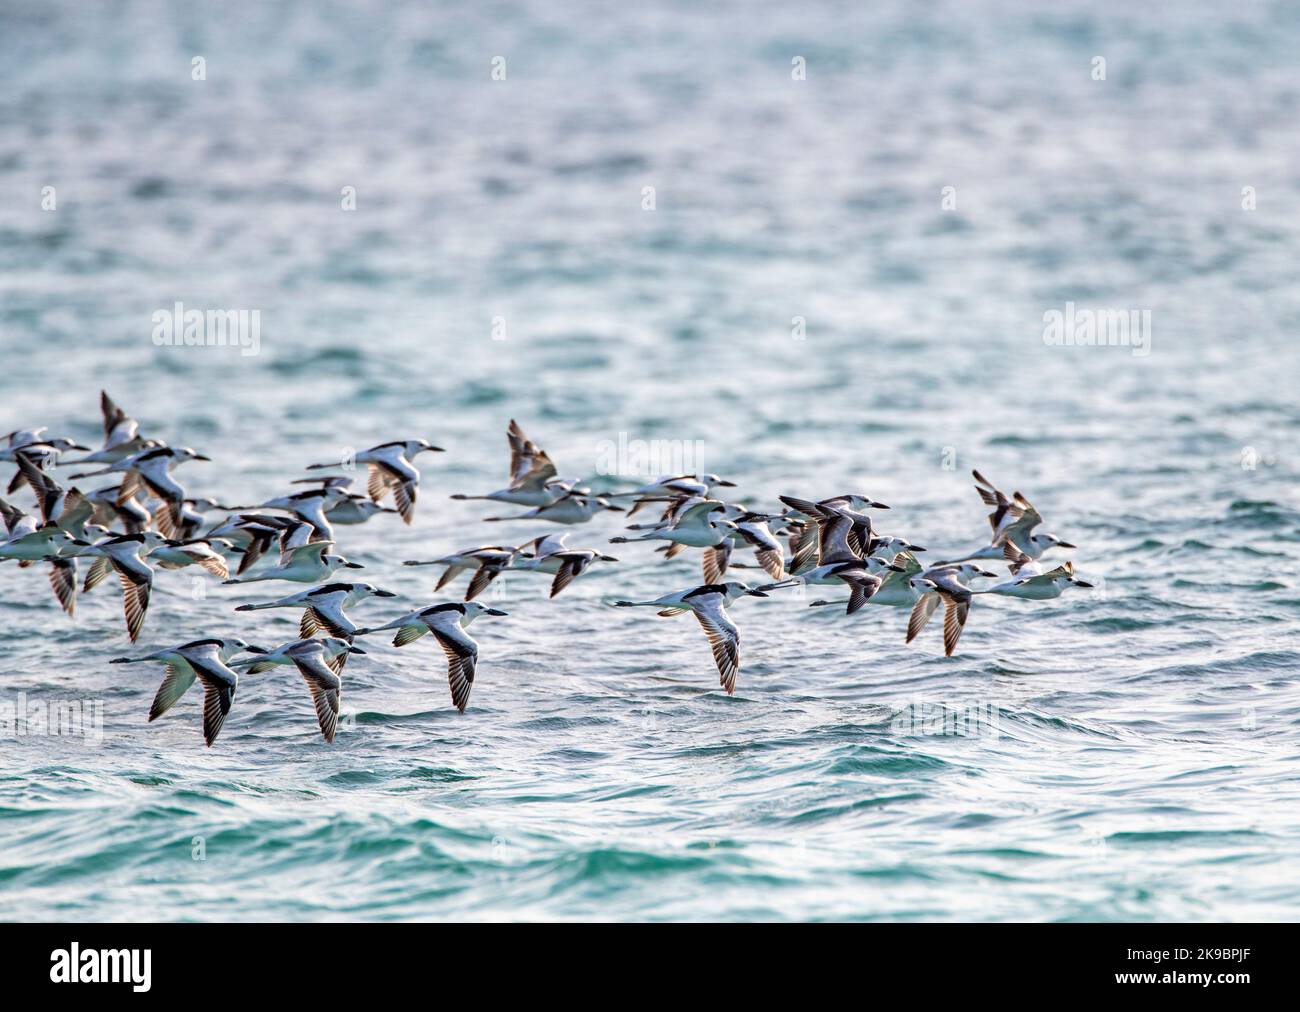 Crab Plovers (Dromas ardeola) on Nosy Ve island in Madagascar. In flight over the sea off the coast. Stock Photo